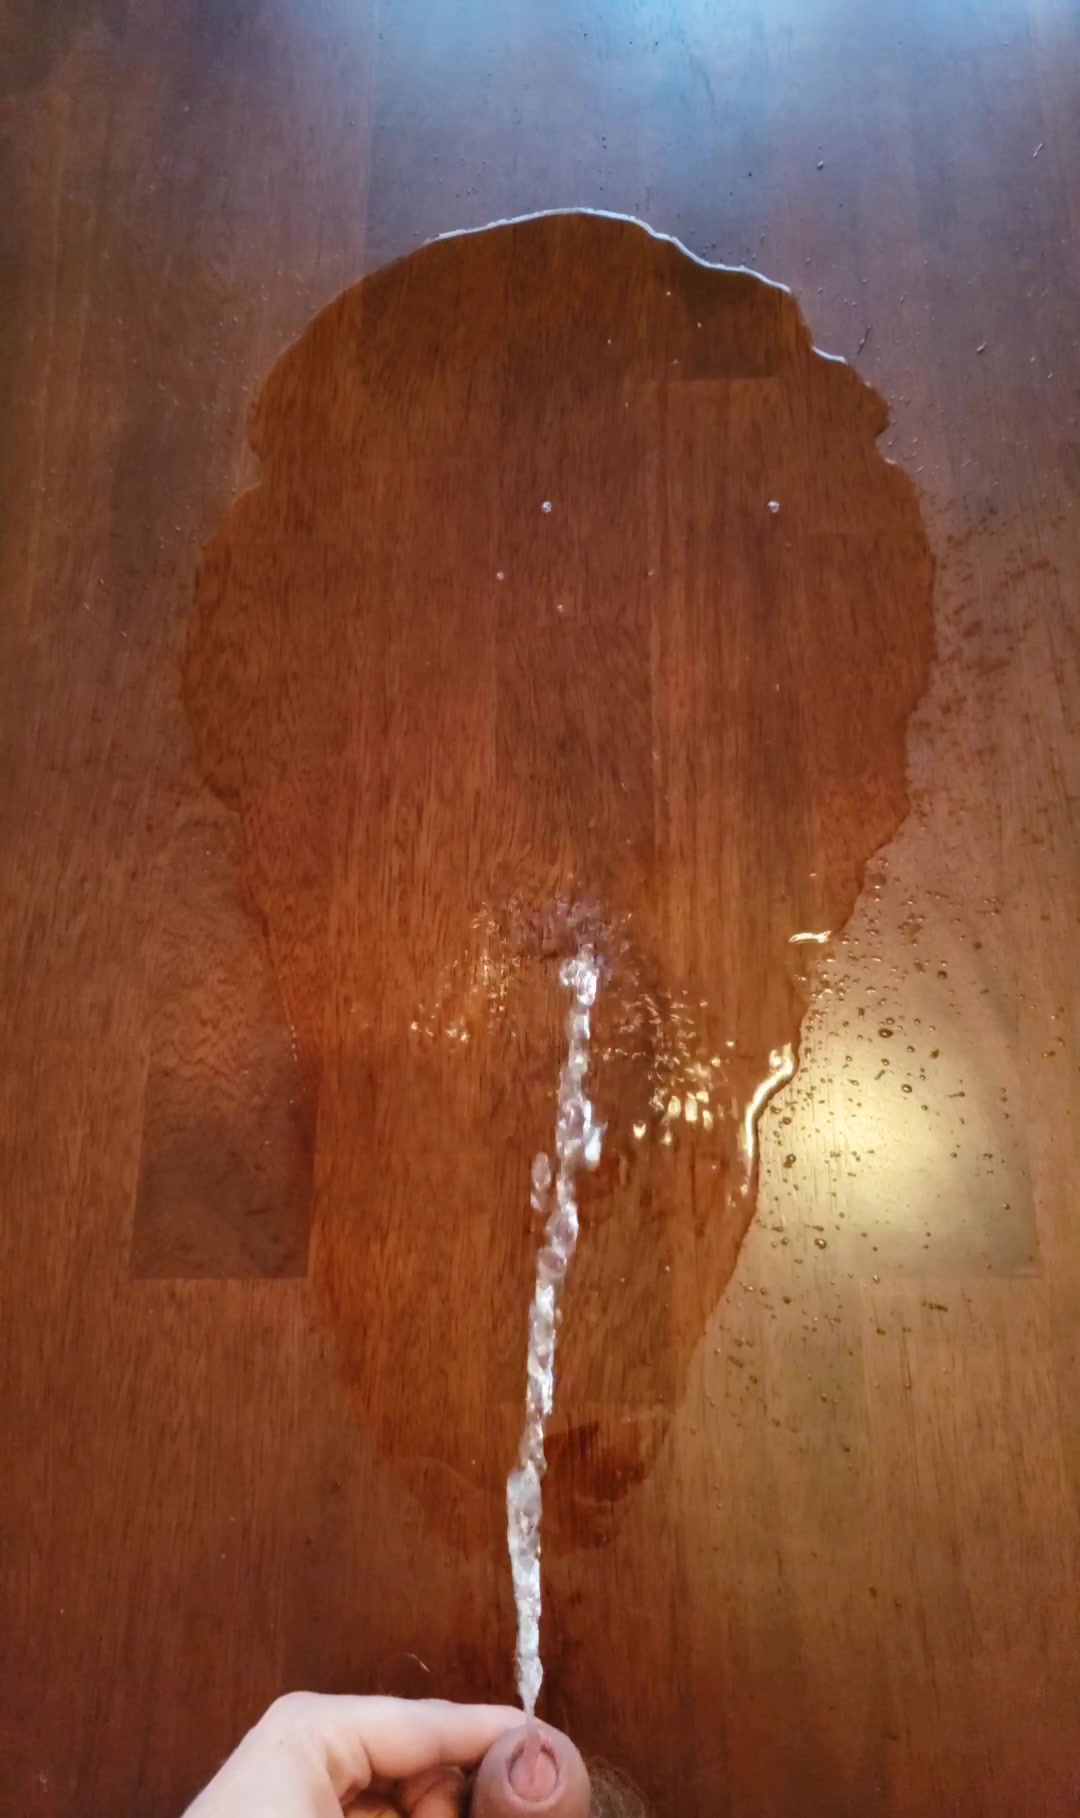 puddle piss on my kitchen table